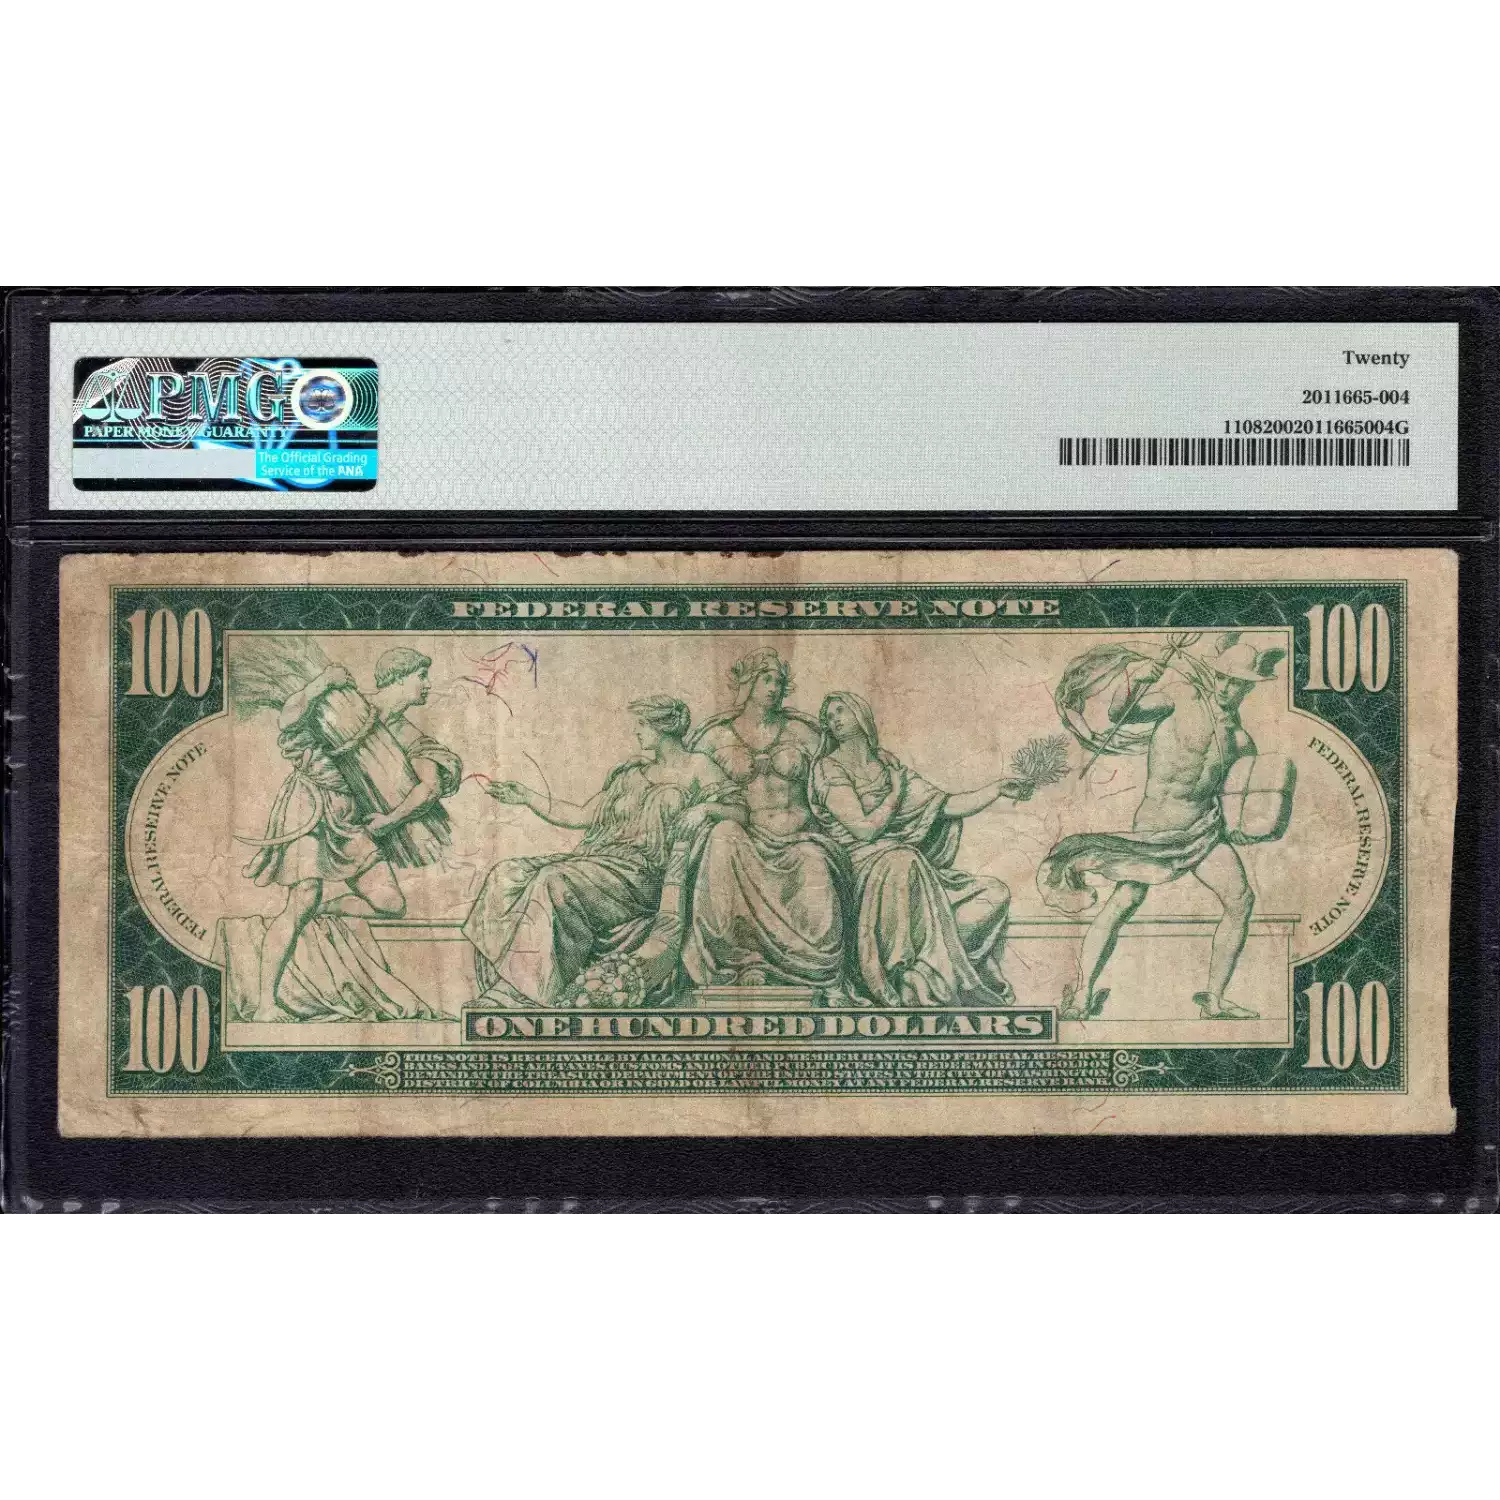 Federal Reserve Note Chicago